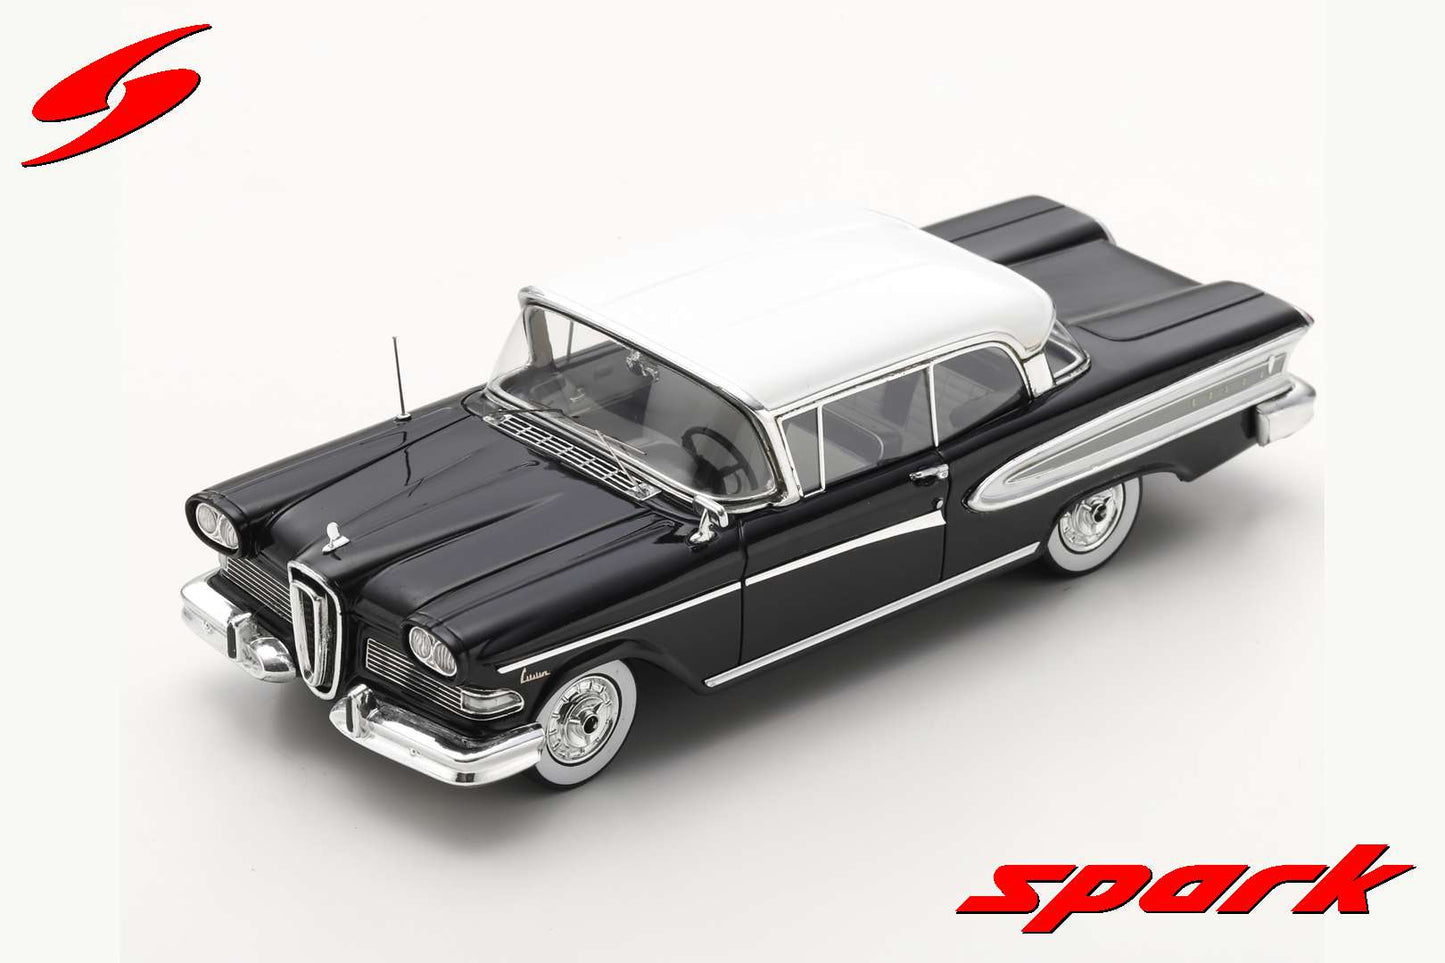 Spark 1:43 Edsel Citation Hard Top Coupe Two Doors 1958 S2960